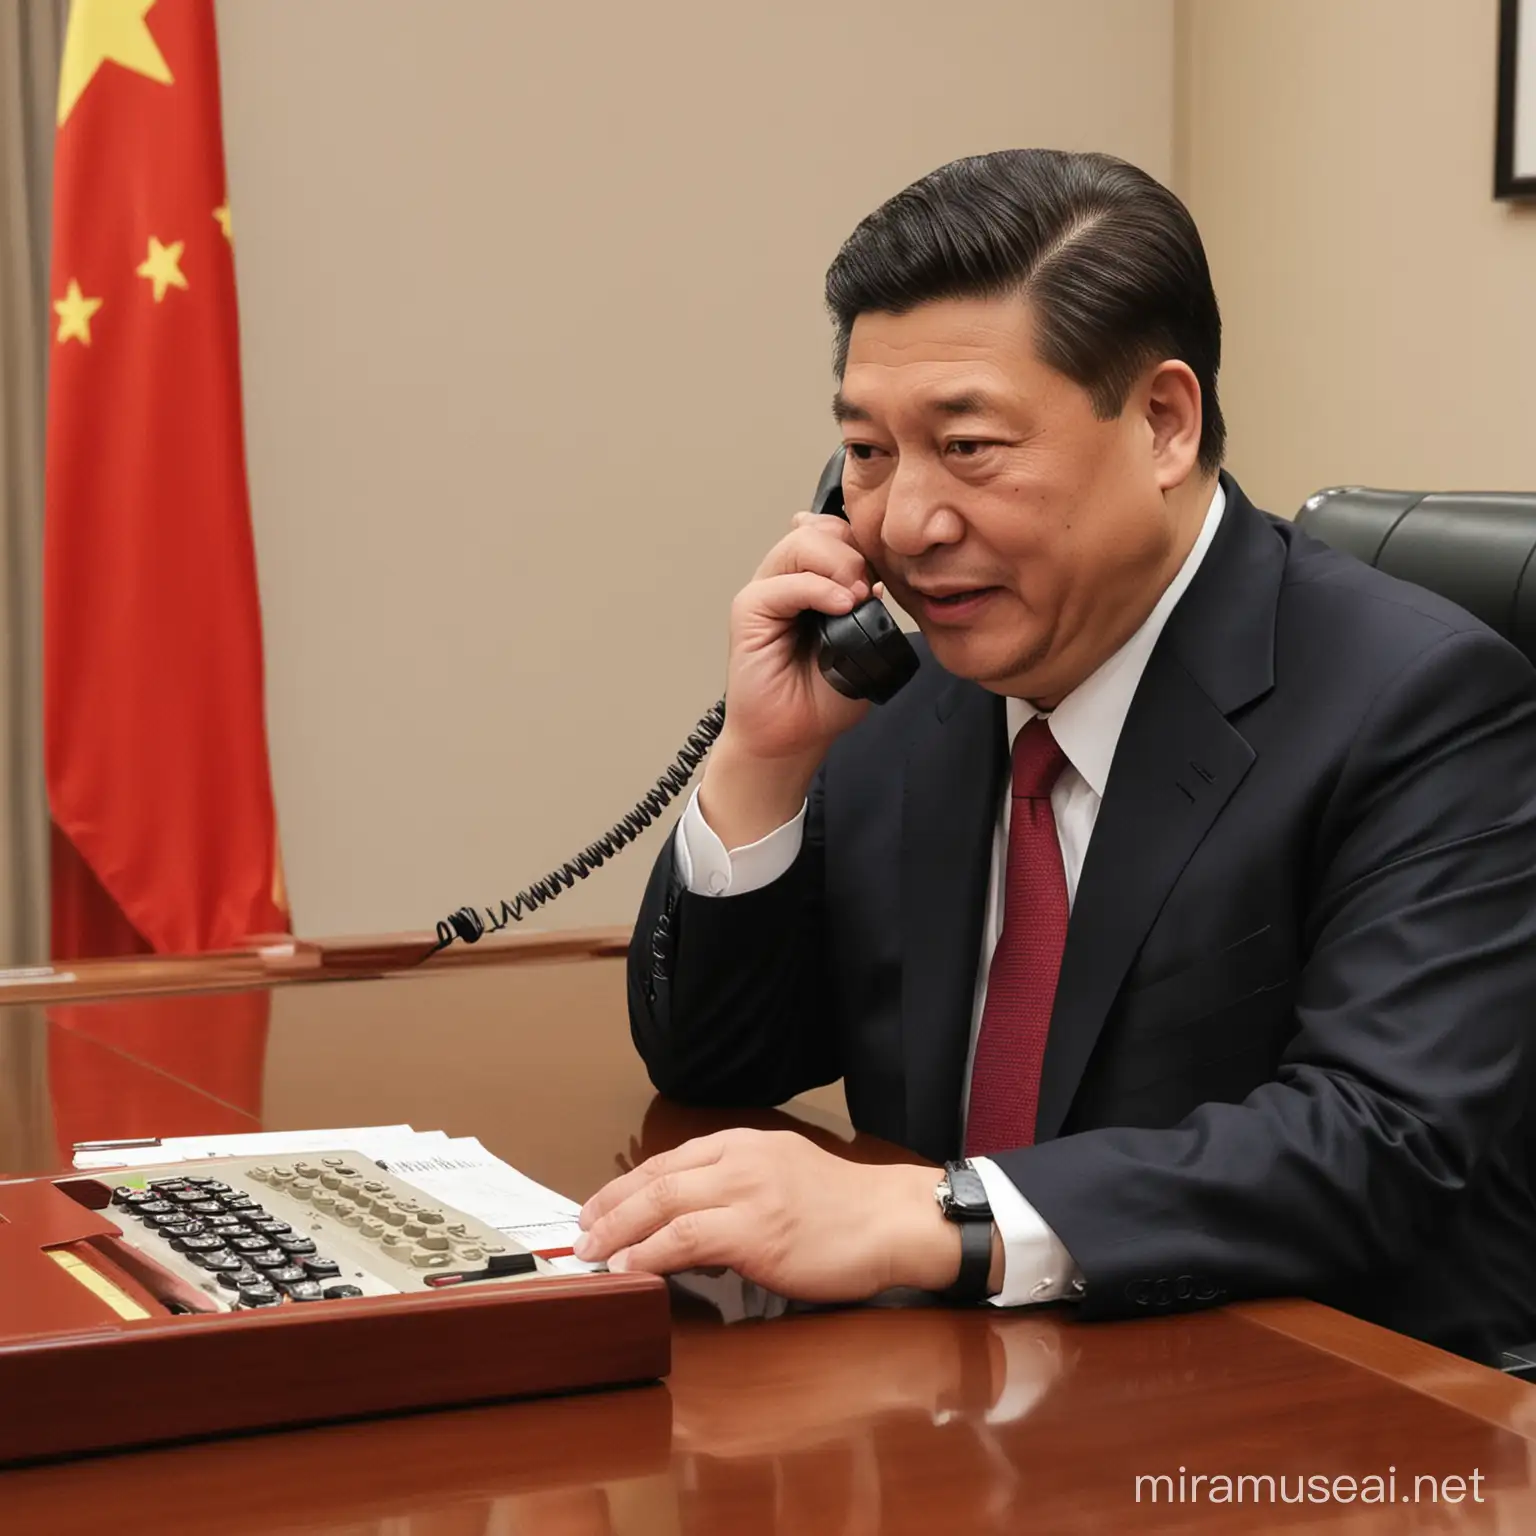 photo of Chinese president Xi Jinping making a phone call from his china office.
